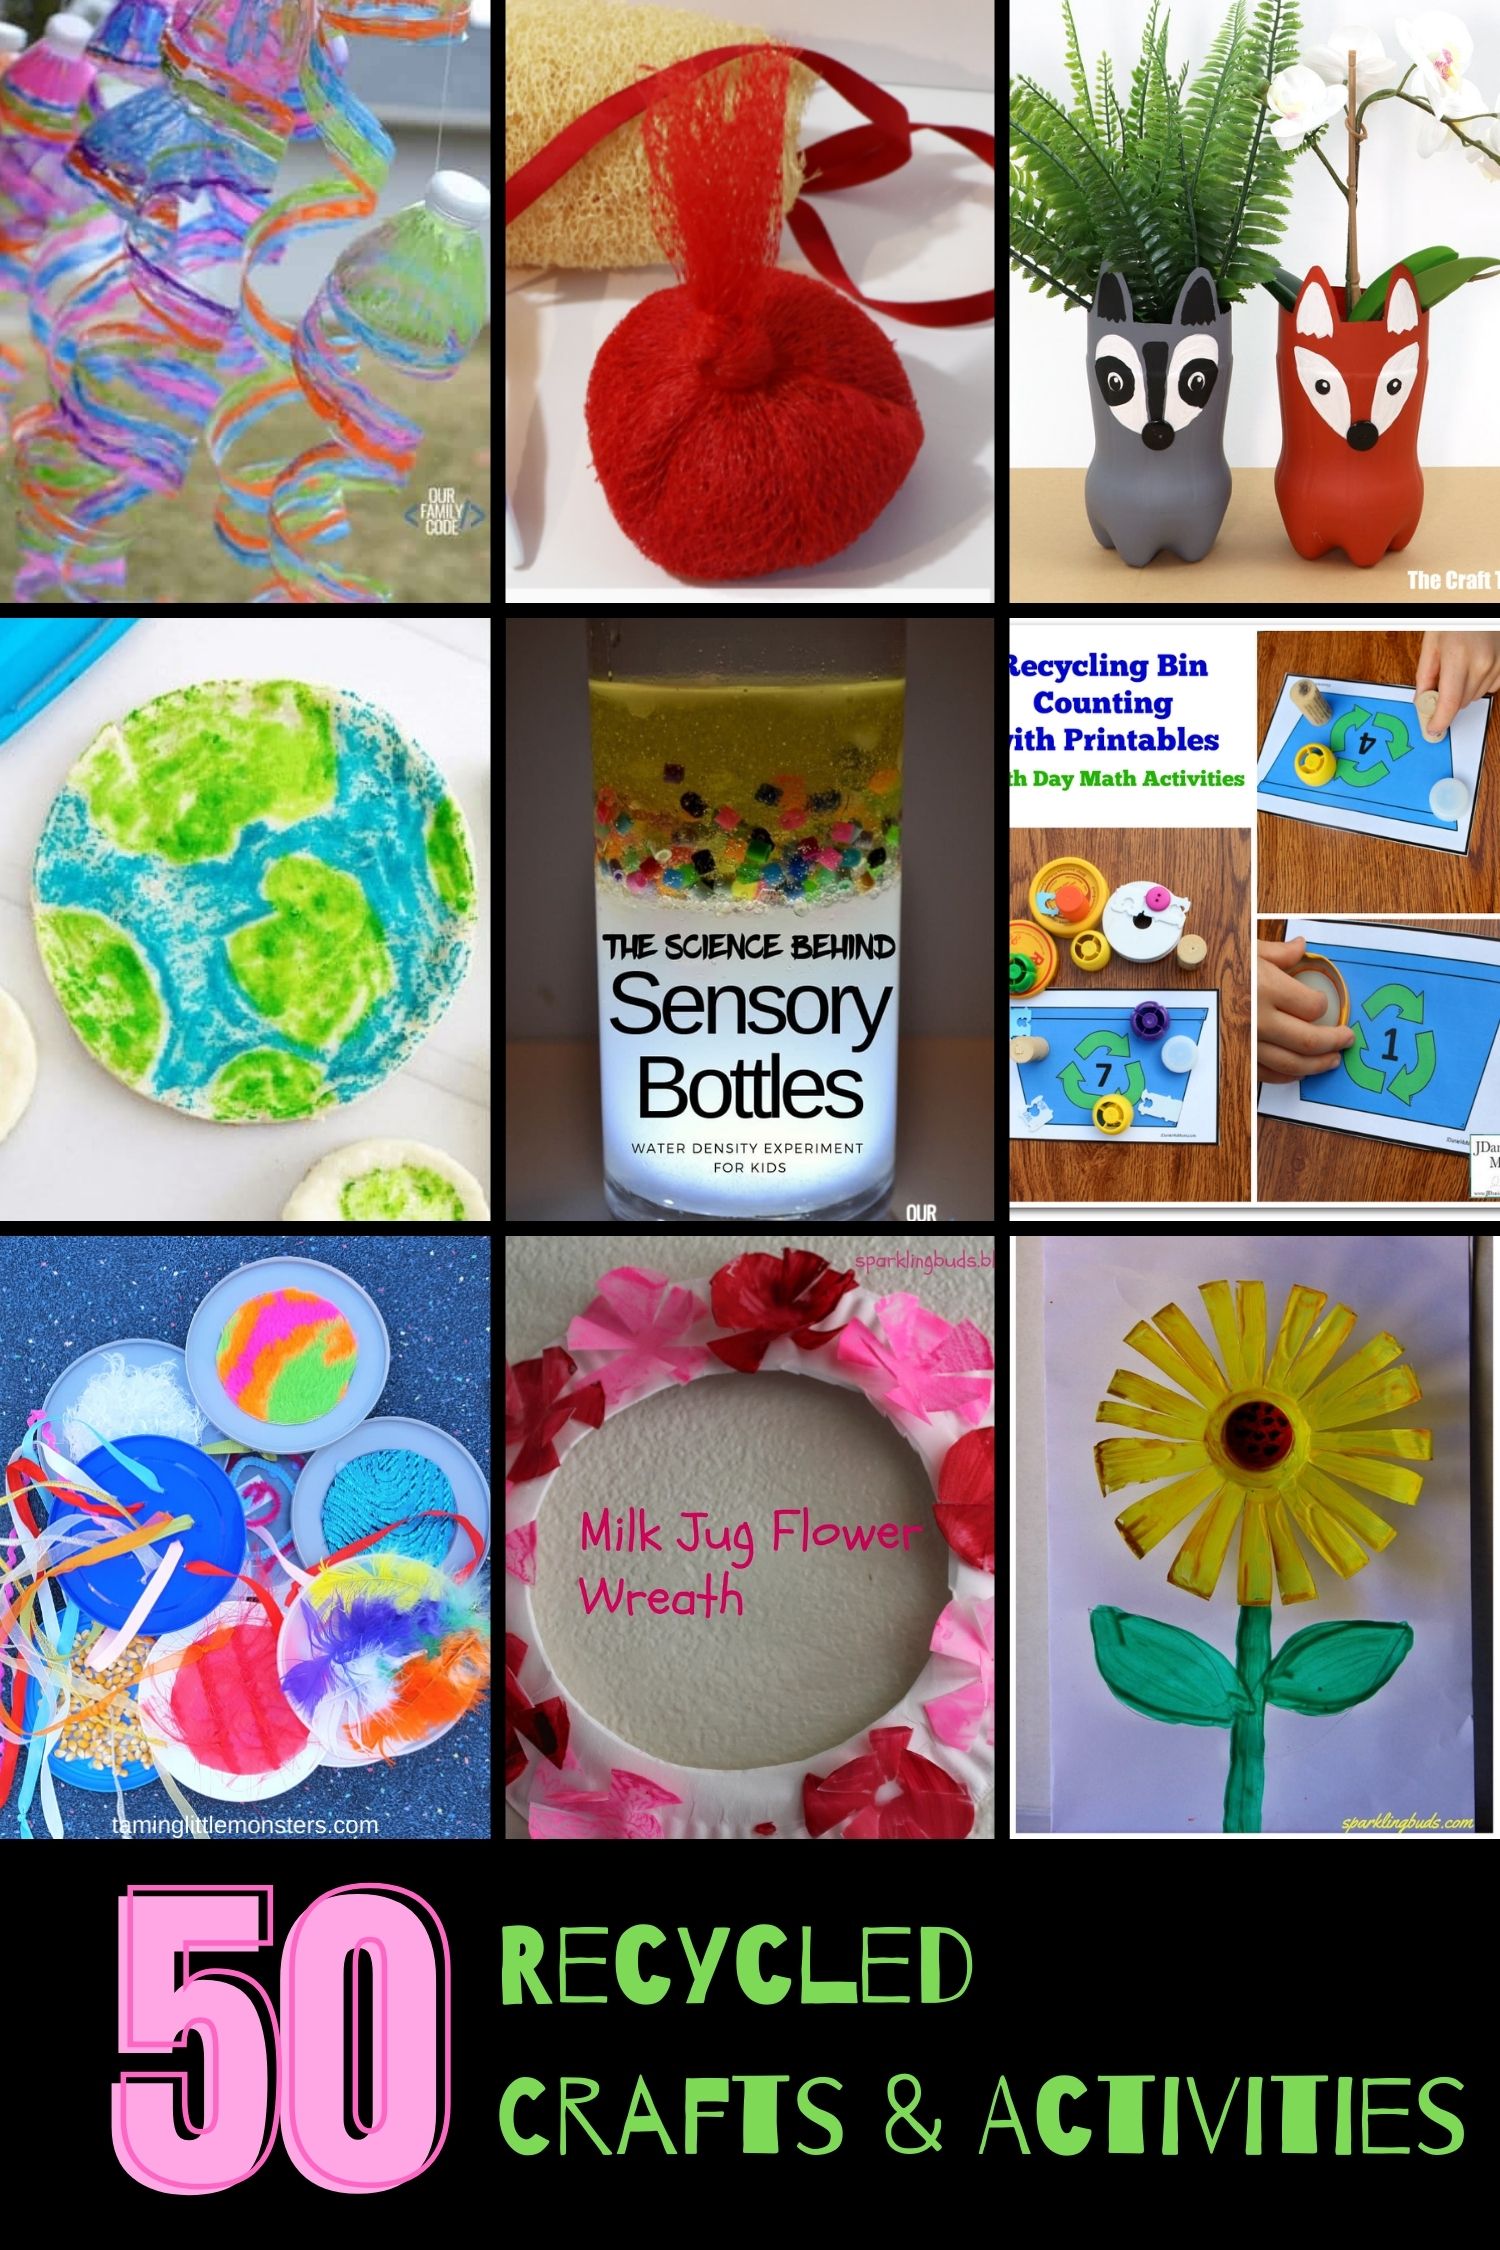 A picture of 9 recycled crafts and activities for kids.